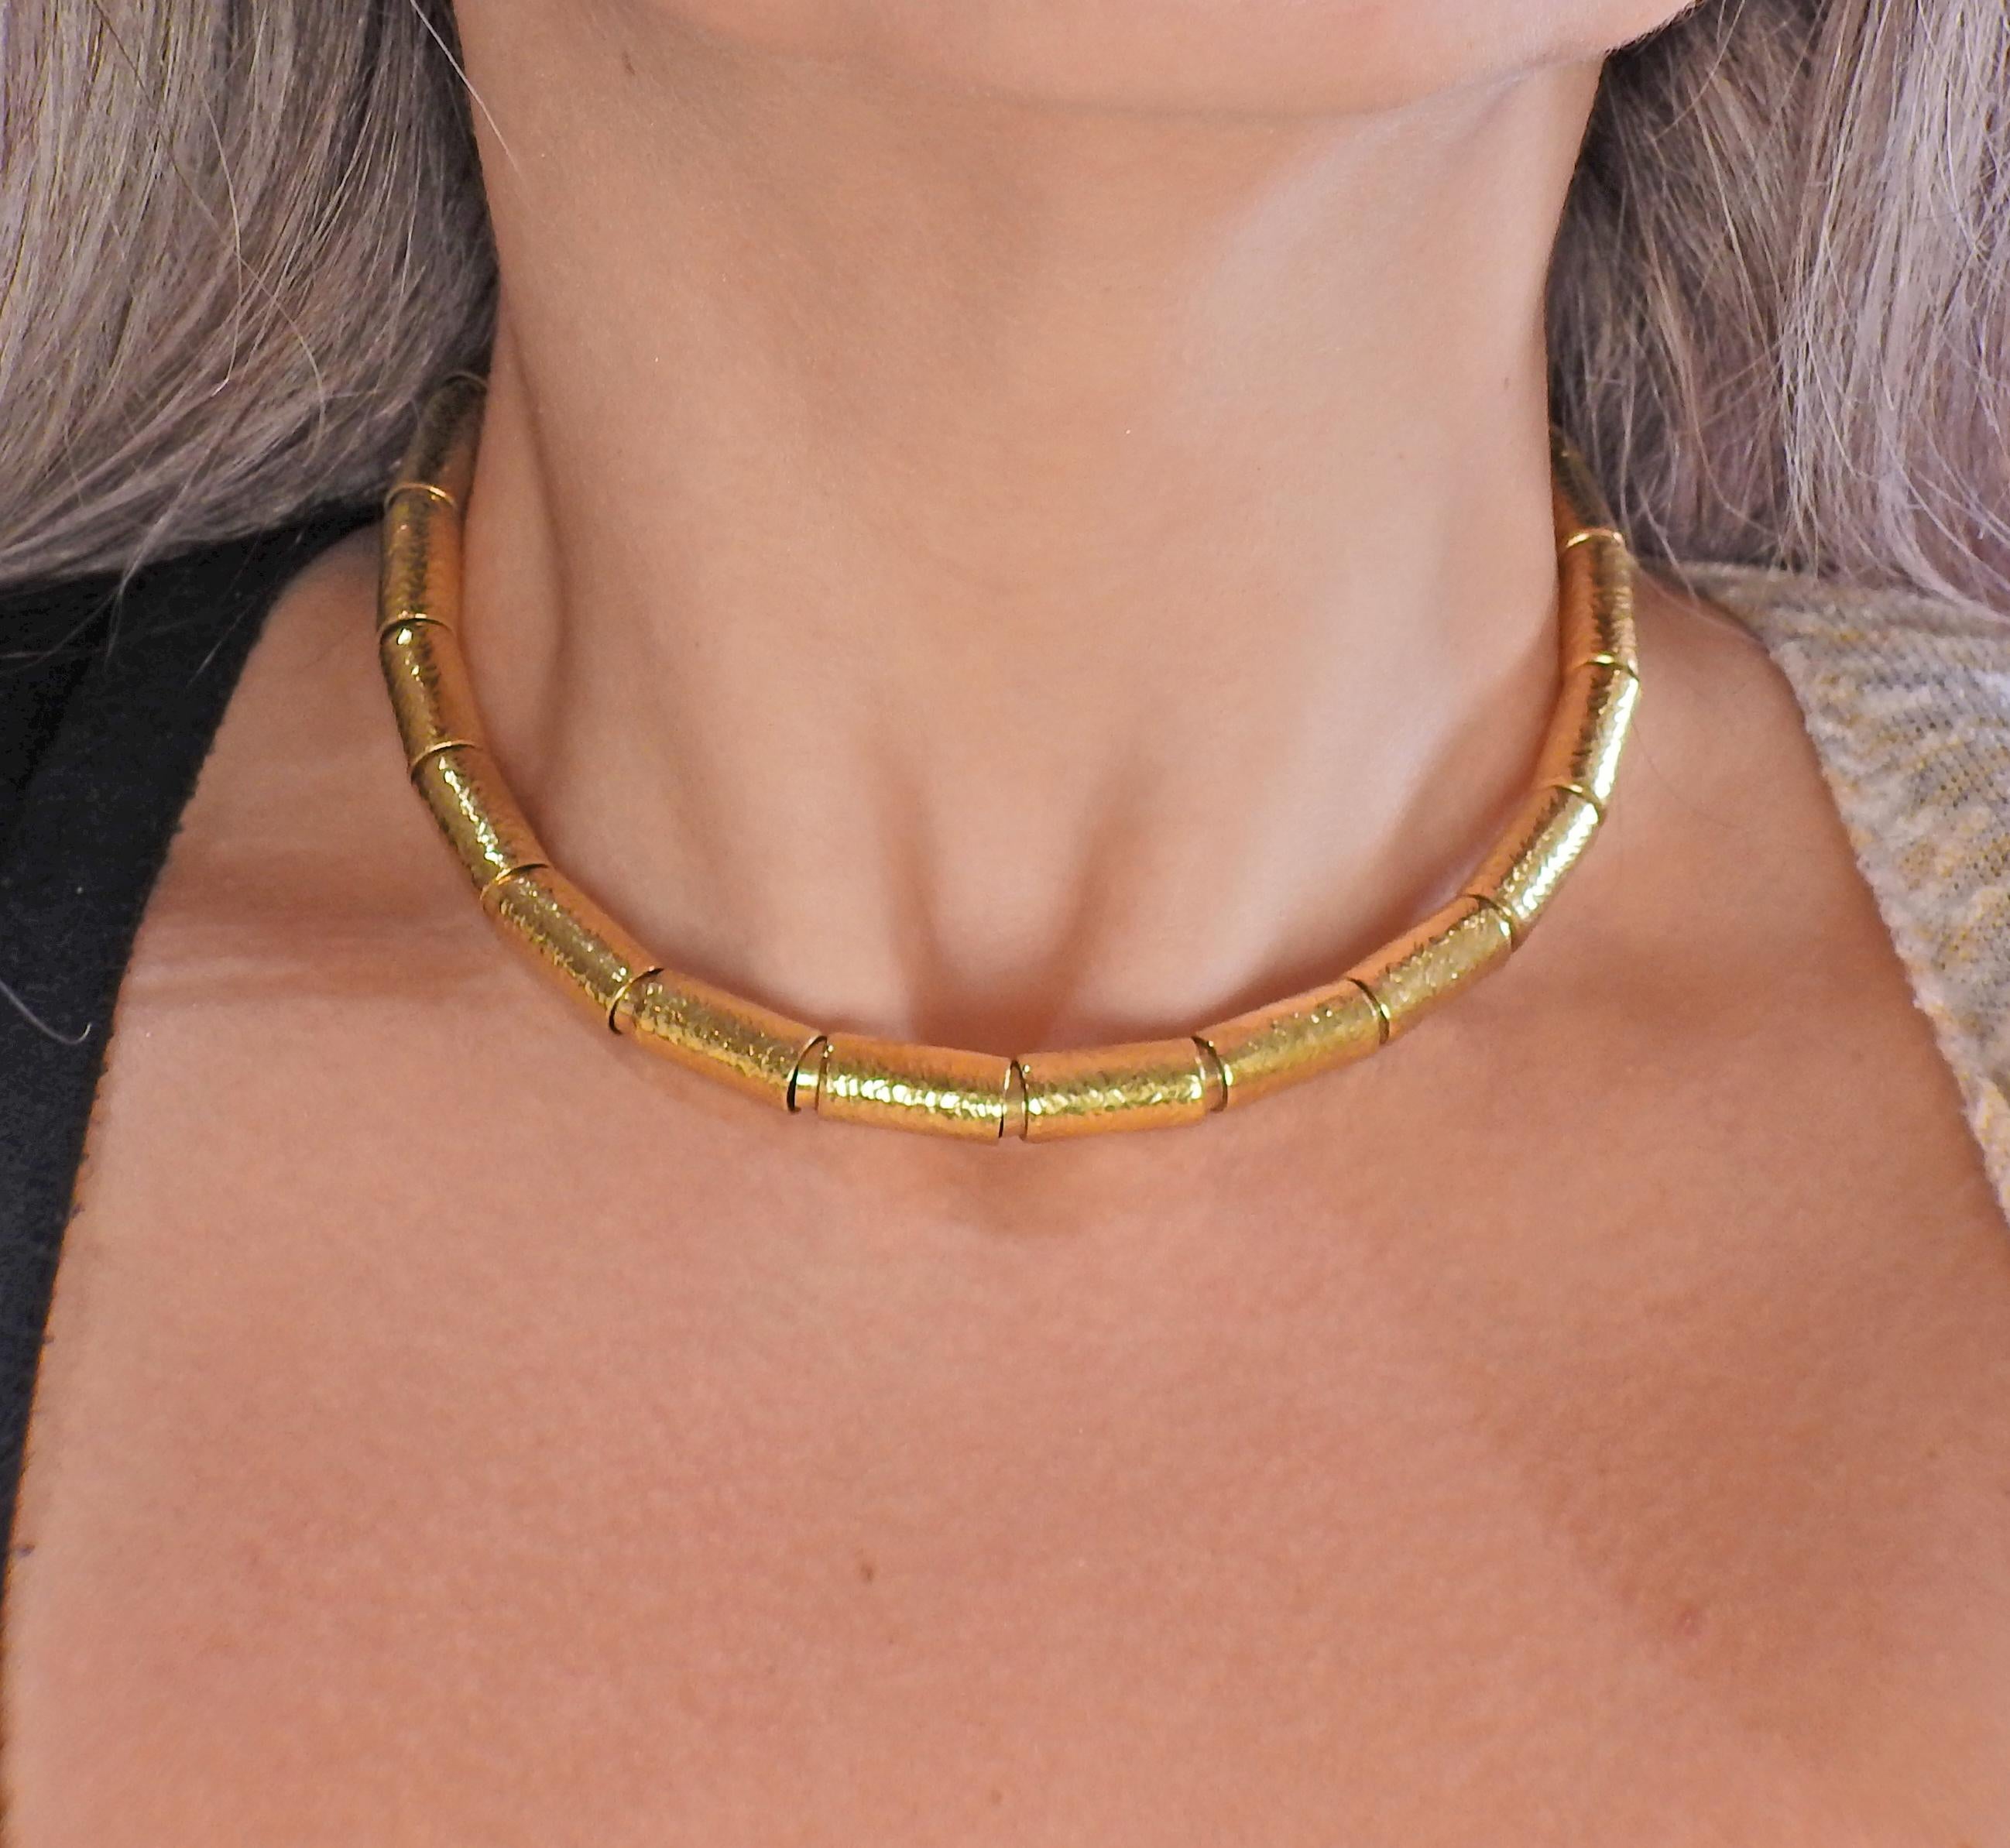 Elizabeth Gage molten gold tube necklace, consisting of 22 tubes. Current retail of a small version of the necklace with 16 tubes is $24300. Necklace is 15.5